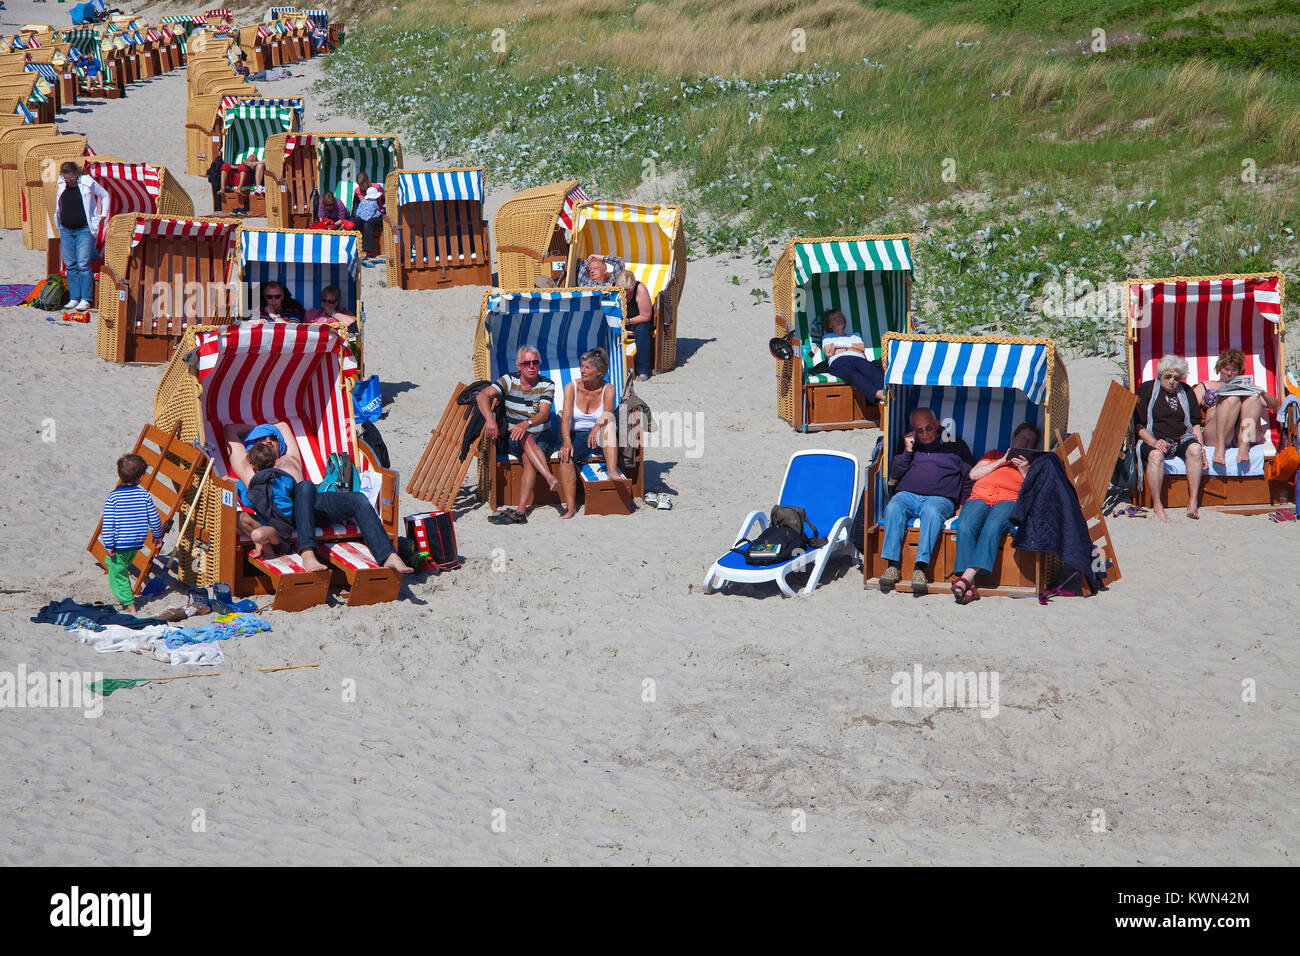 People with beach chairs at the beach of Wustrow, Fishland, Mecklenburg-Western Pomerania, Baltic sea, Germany, Europe Stock Photo